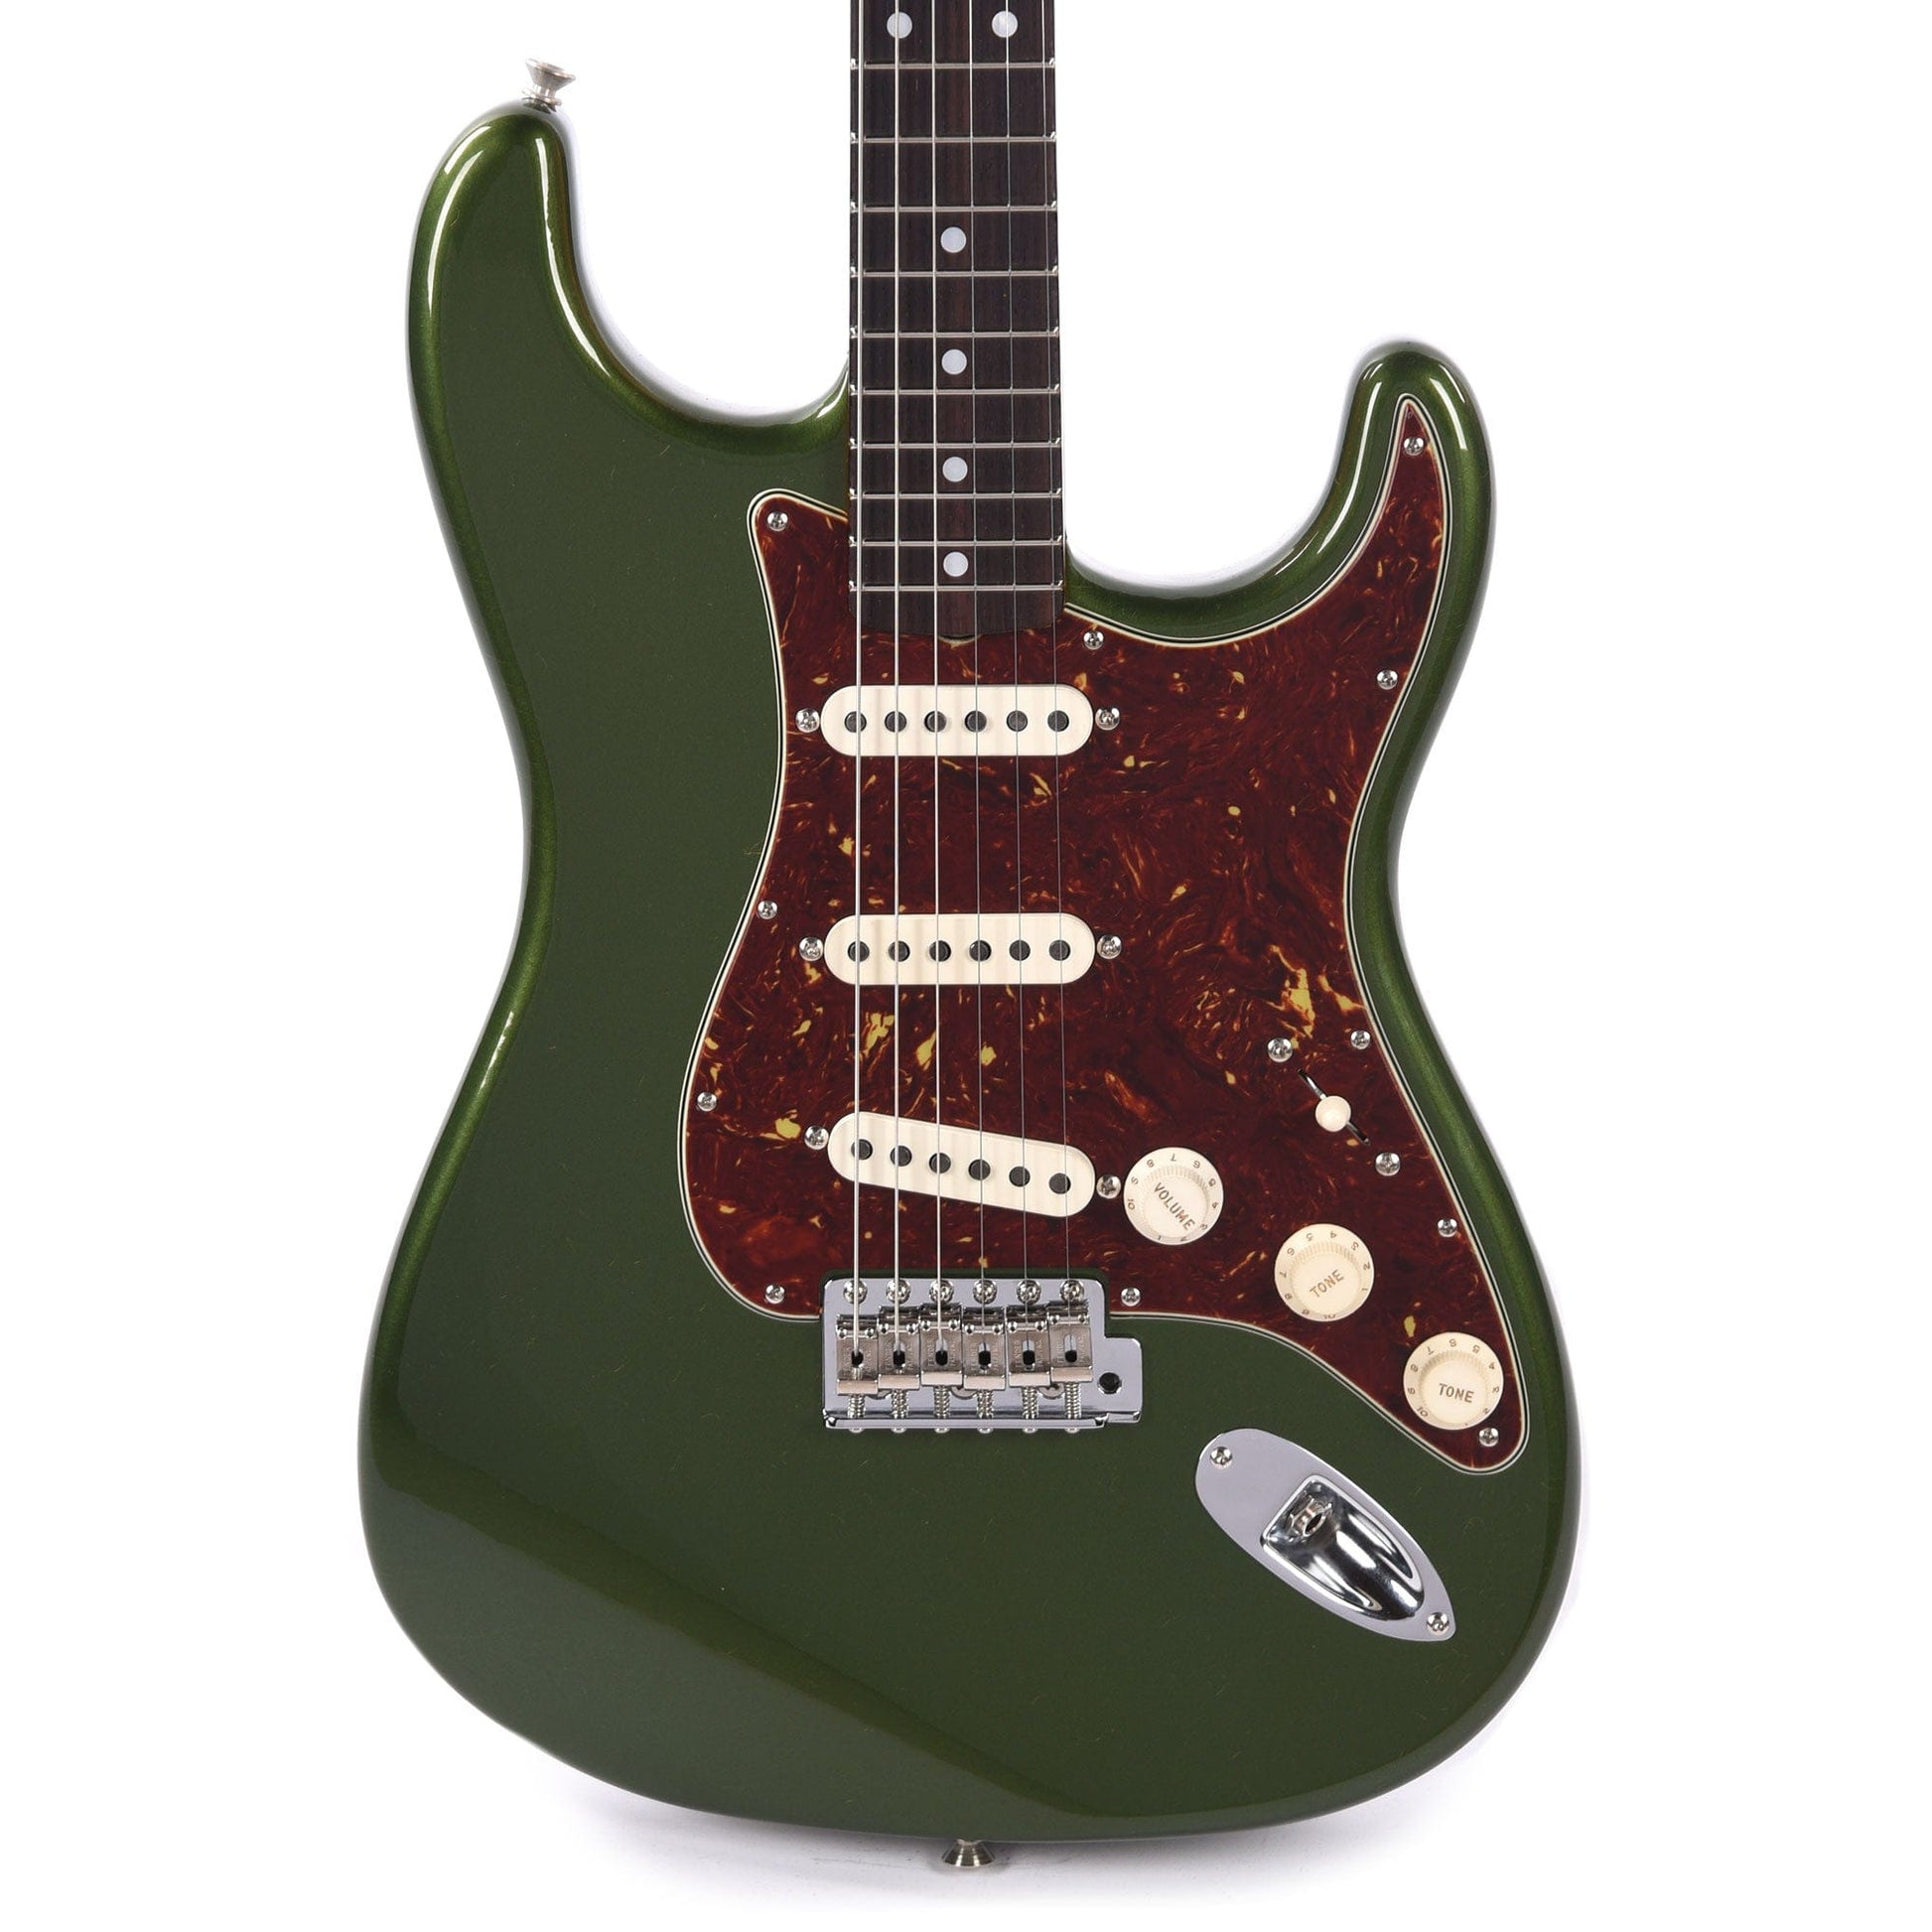 Fender Custom Shop 1963 Stratocaster Deluxe Closet Classic Aged Cadillac Green Master Built by David Brown Electric Guitars / Solid Body